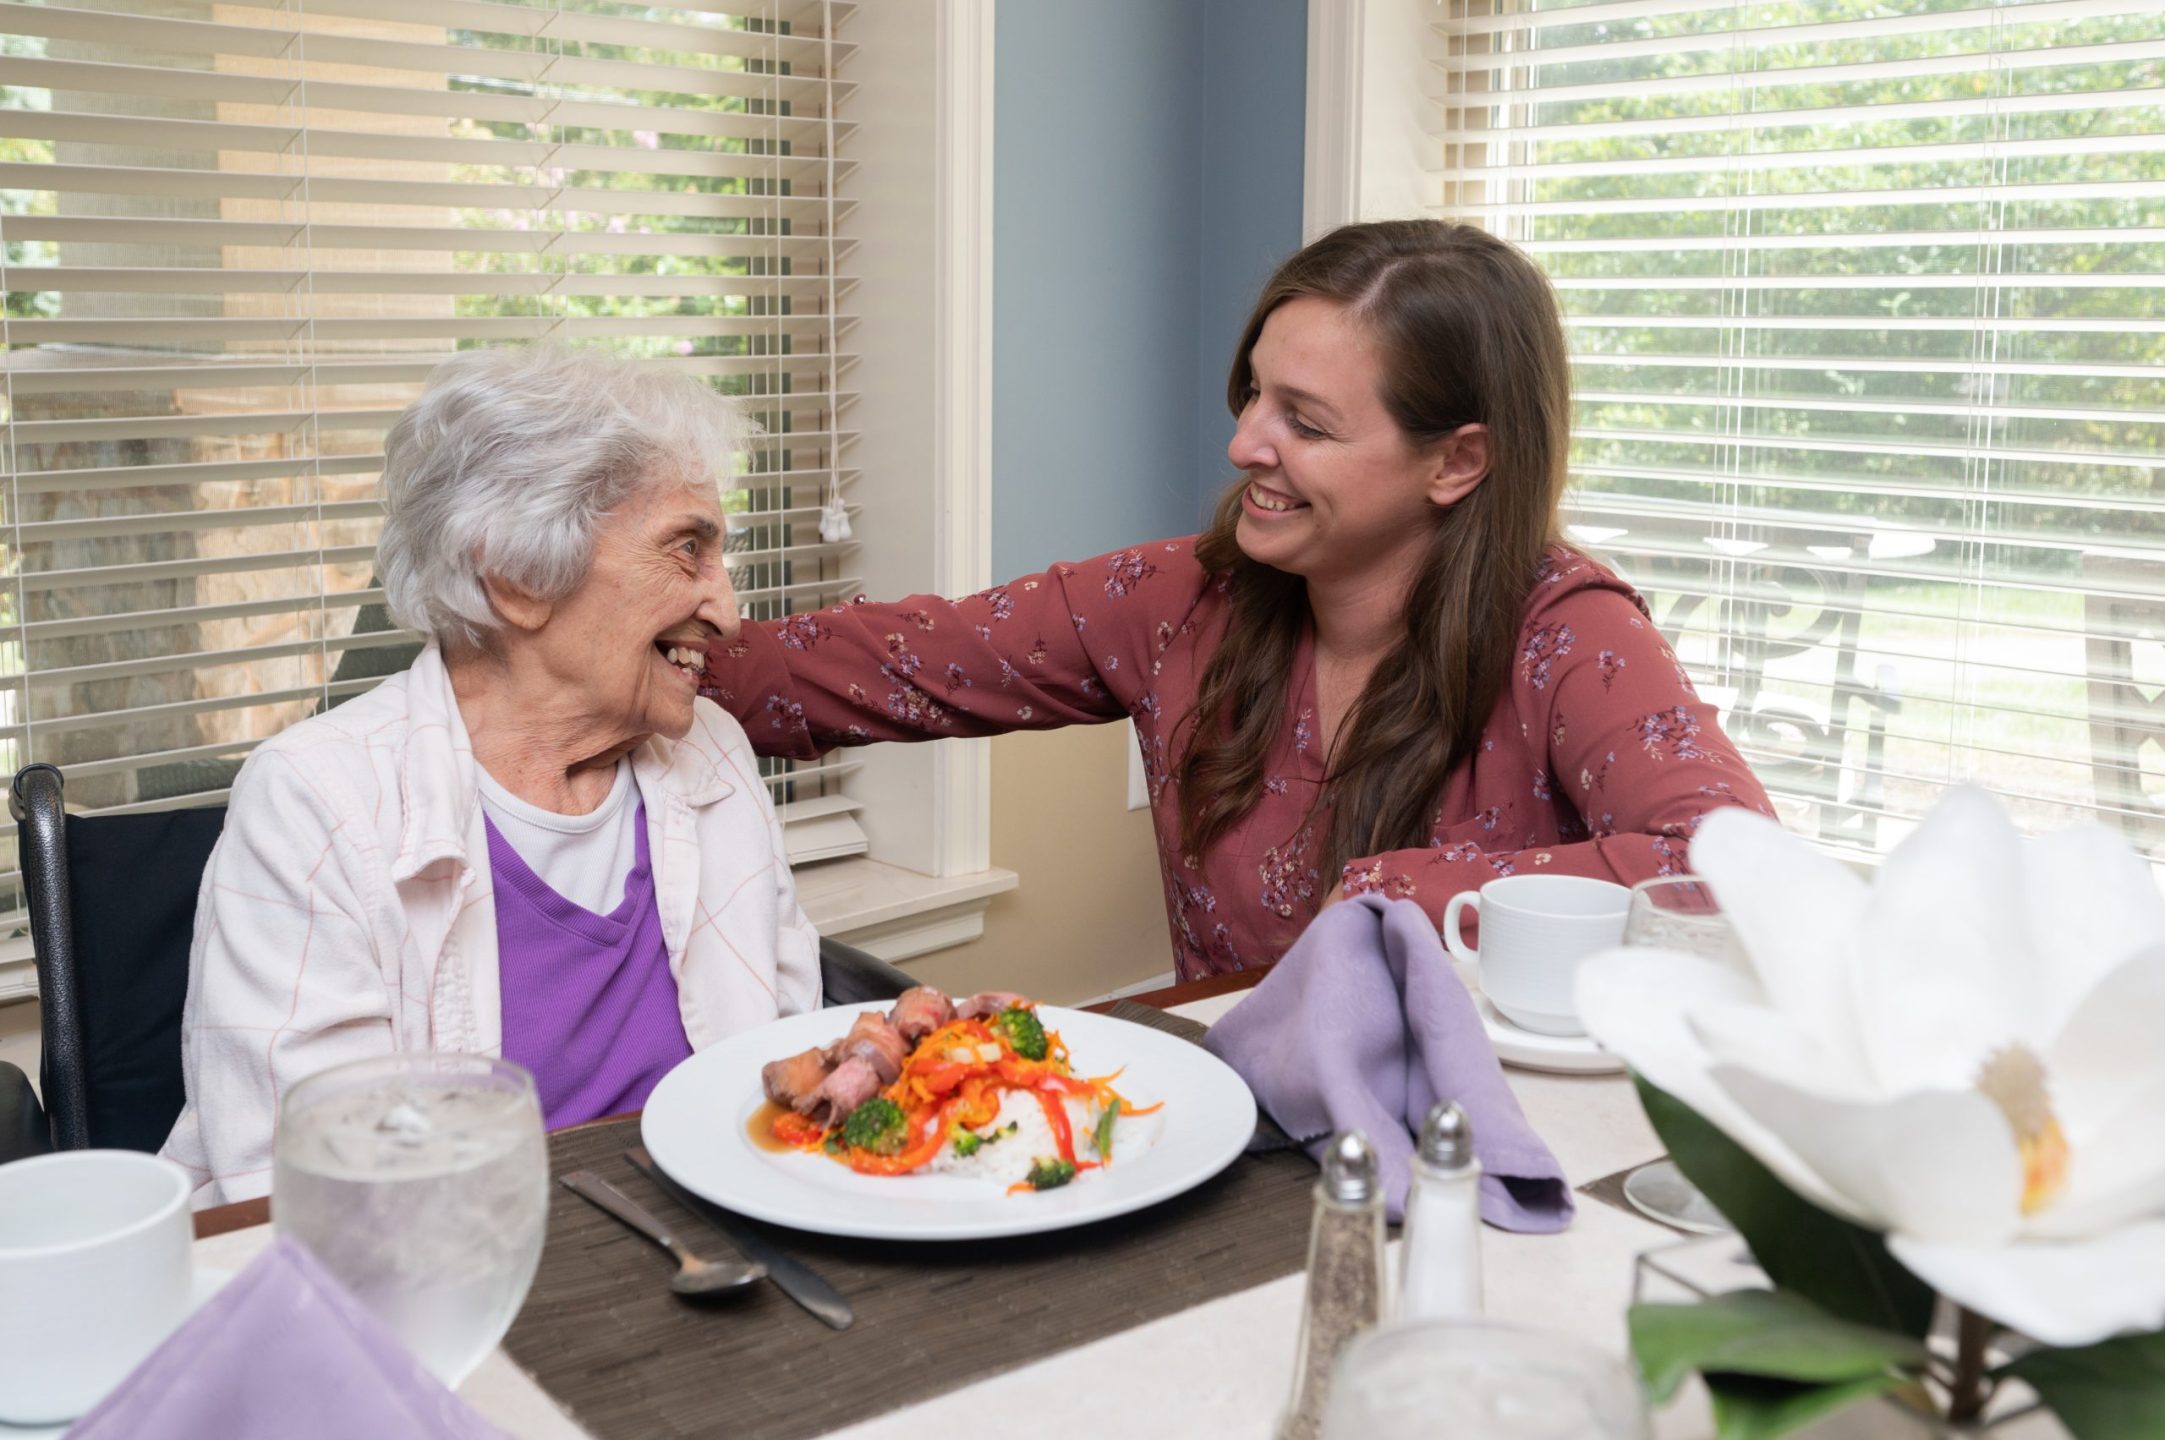 An employee sits with a resident during a meal.